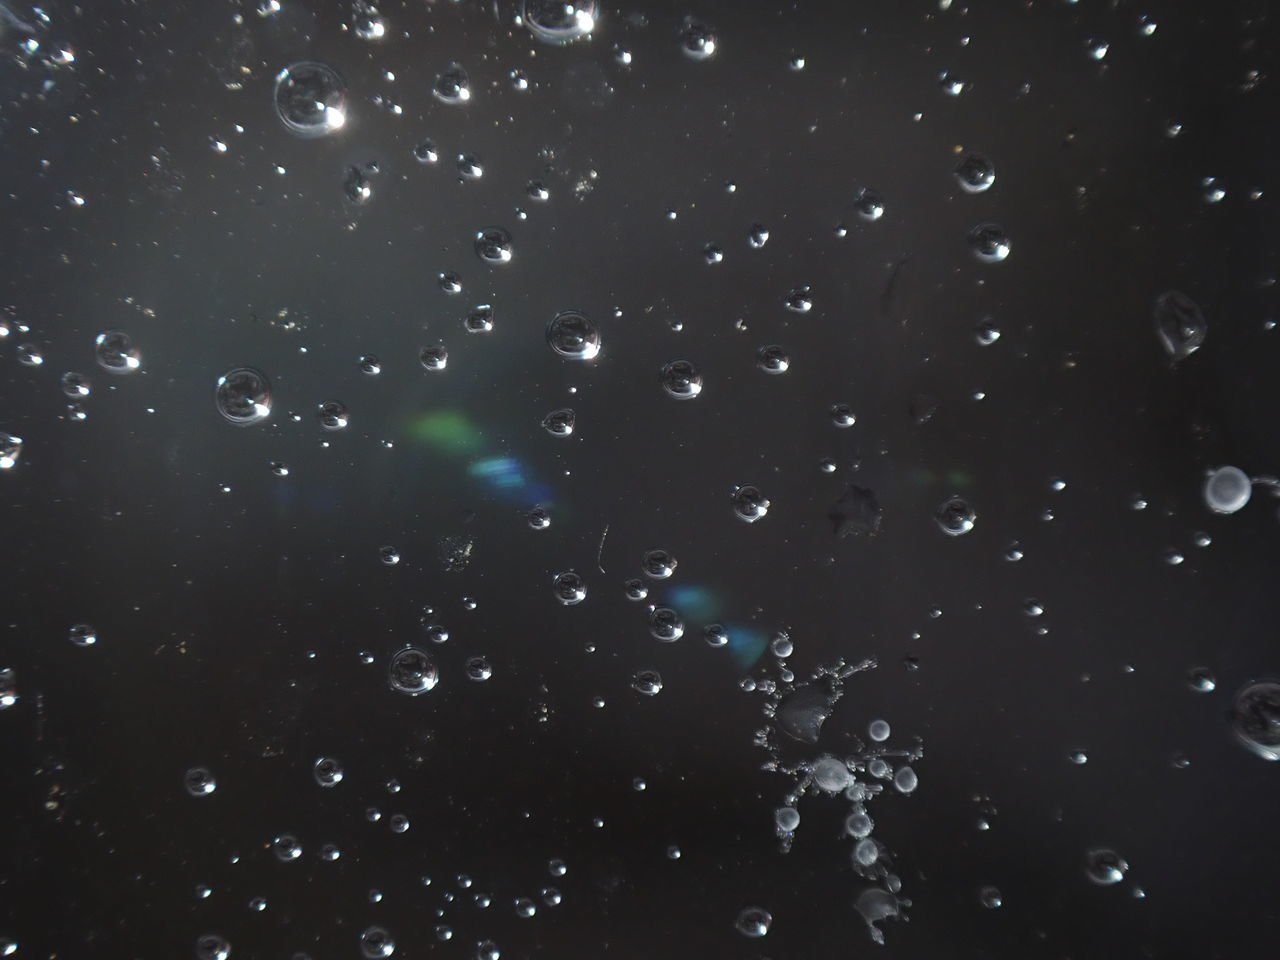 CLOSE-UP OF BUBBLES AGAINST SKY AT NIGHT